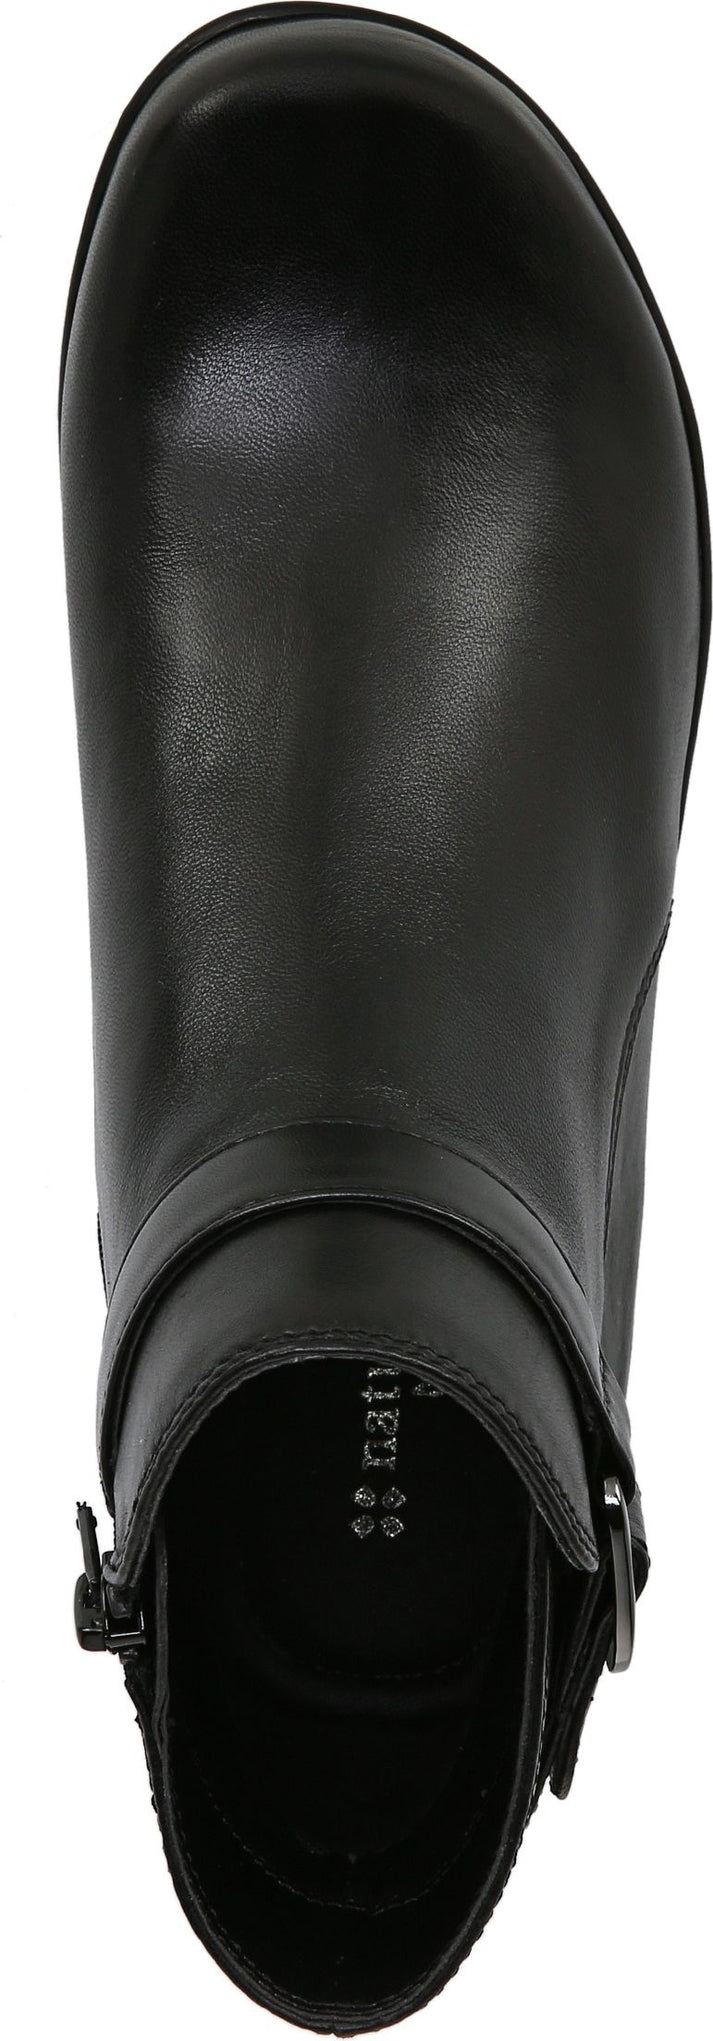 Naturalizer Boots Colette Black Leather - Wide